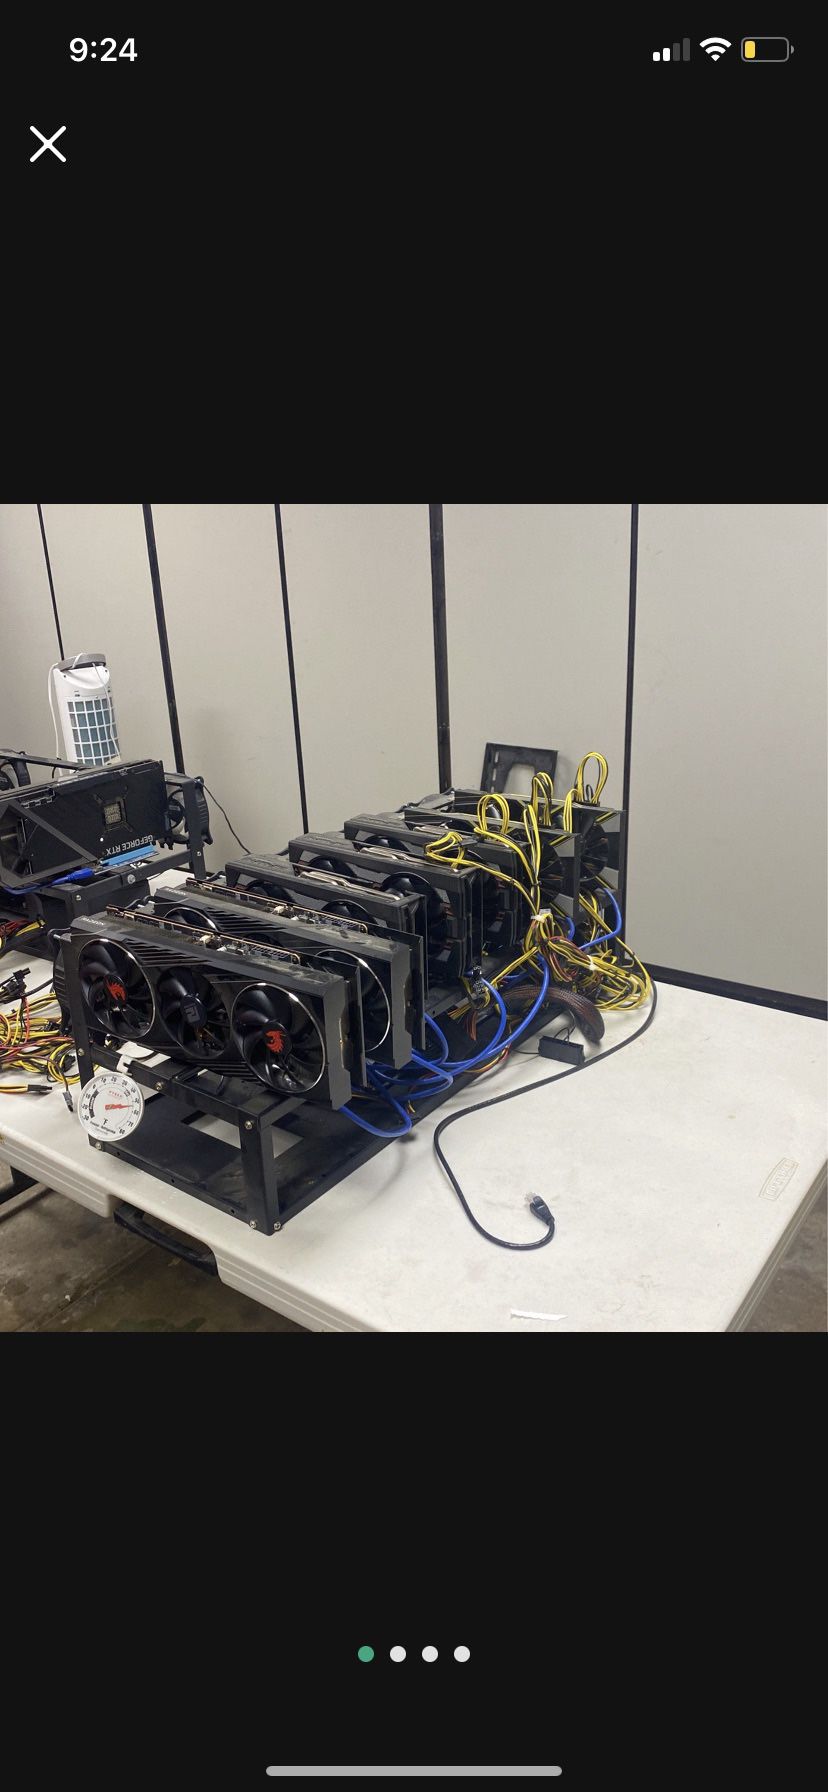 Two Mining Rigs